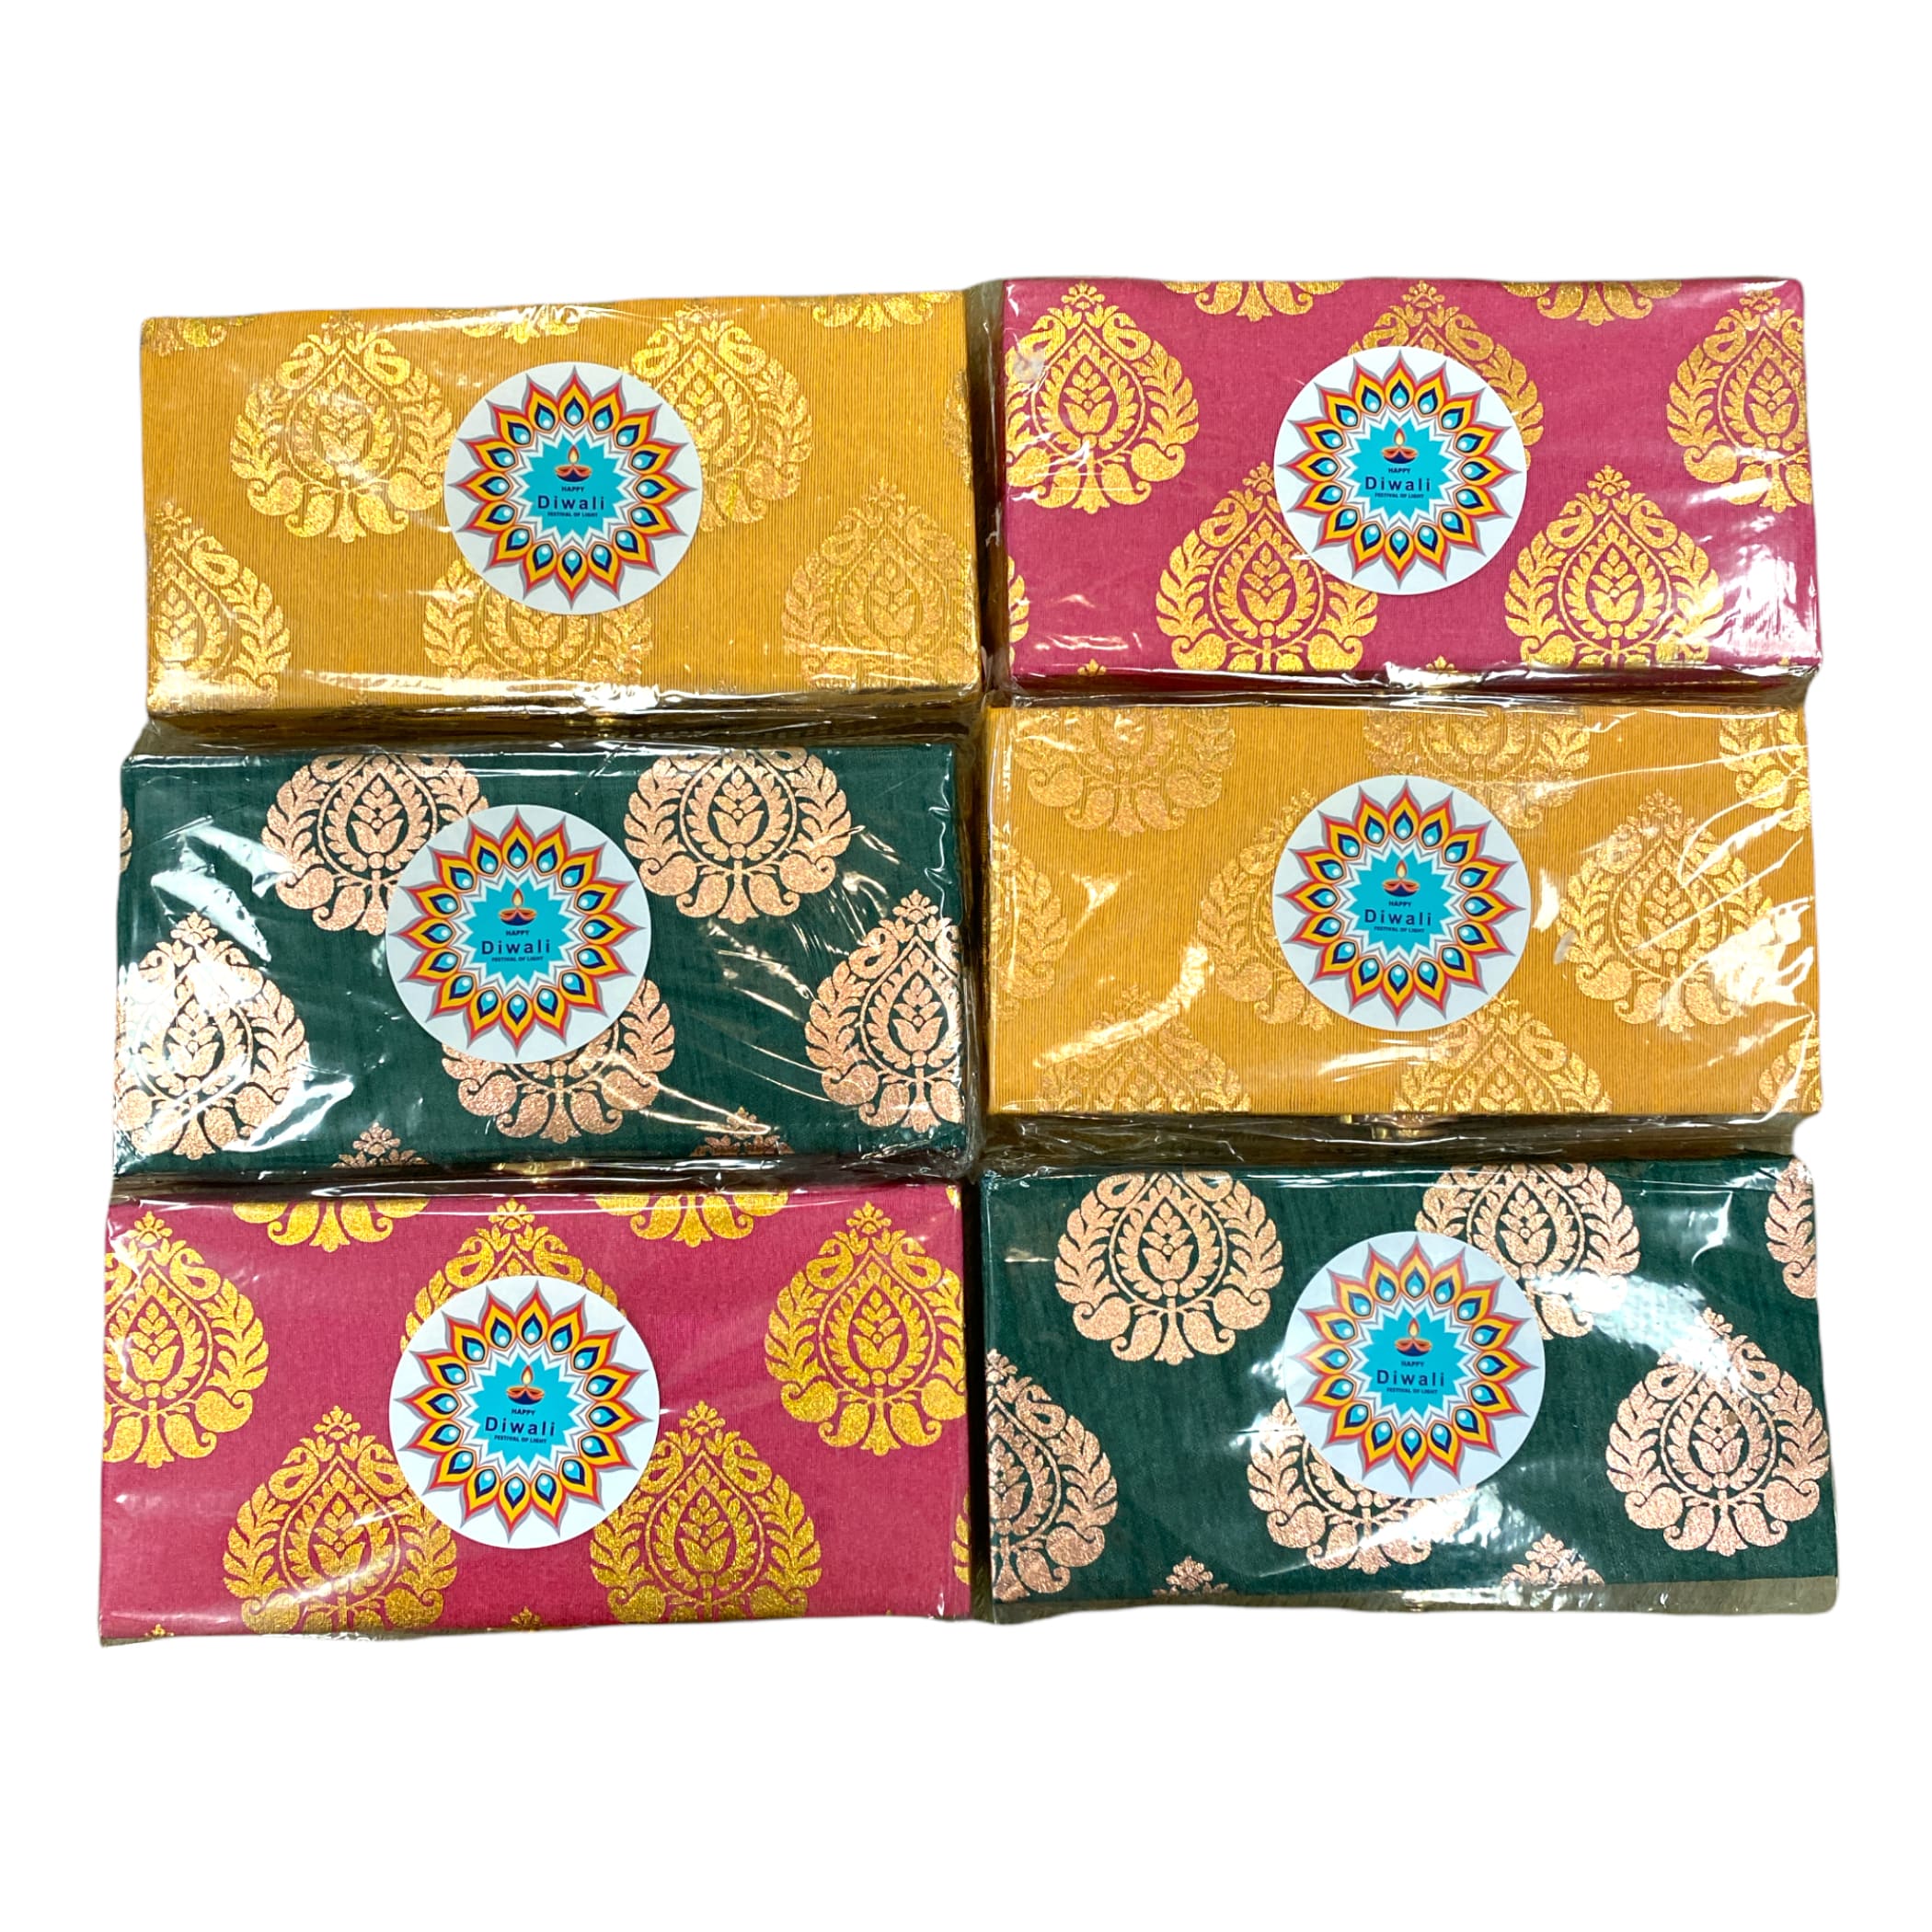 Candle holder personalize diwali gifts boxes navratri gift